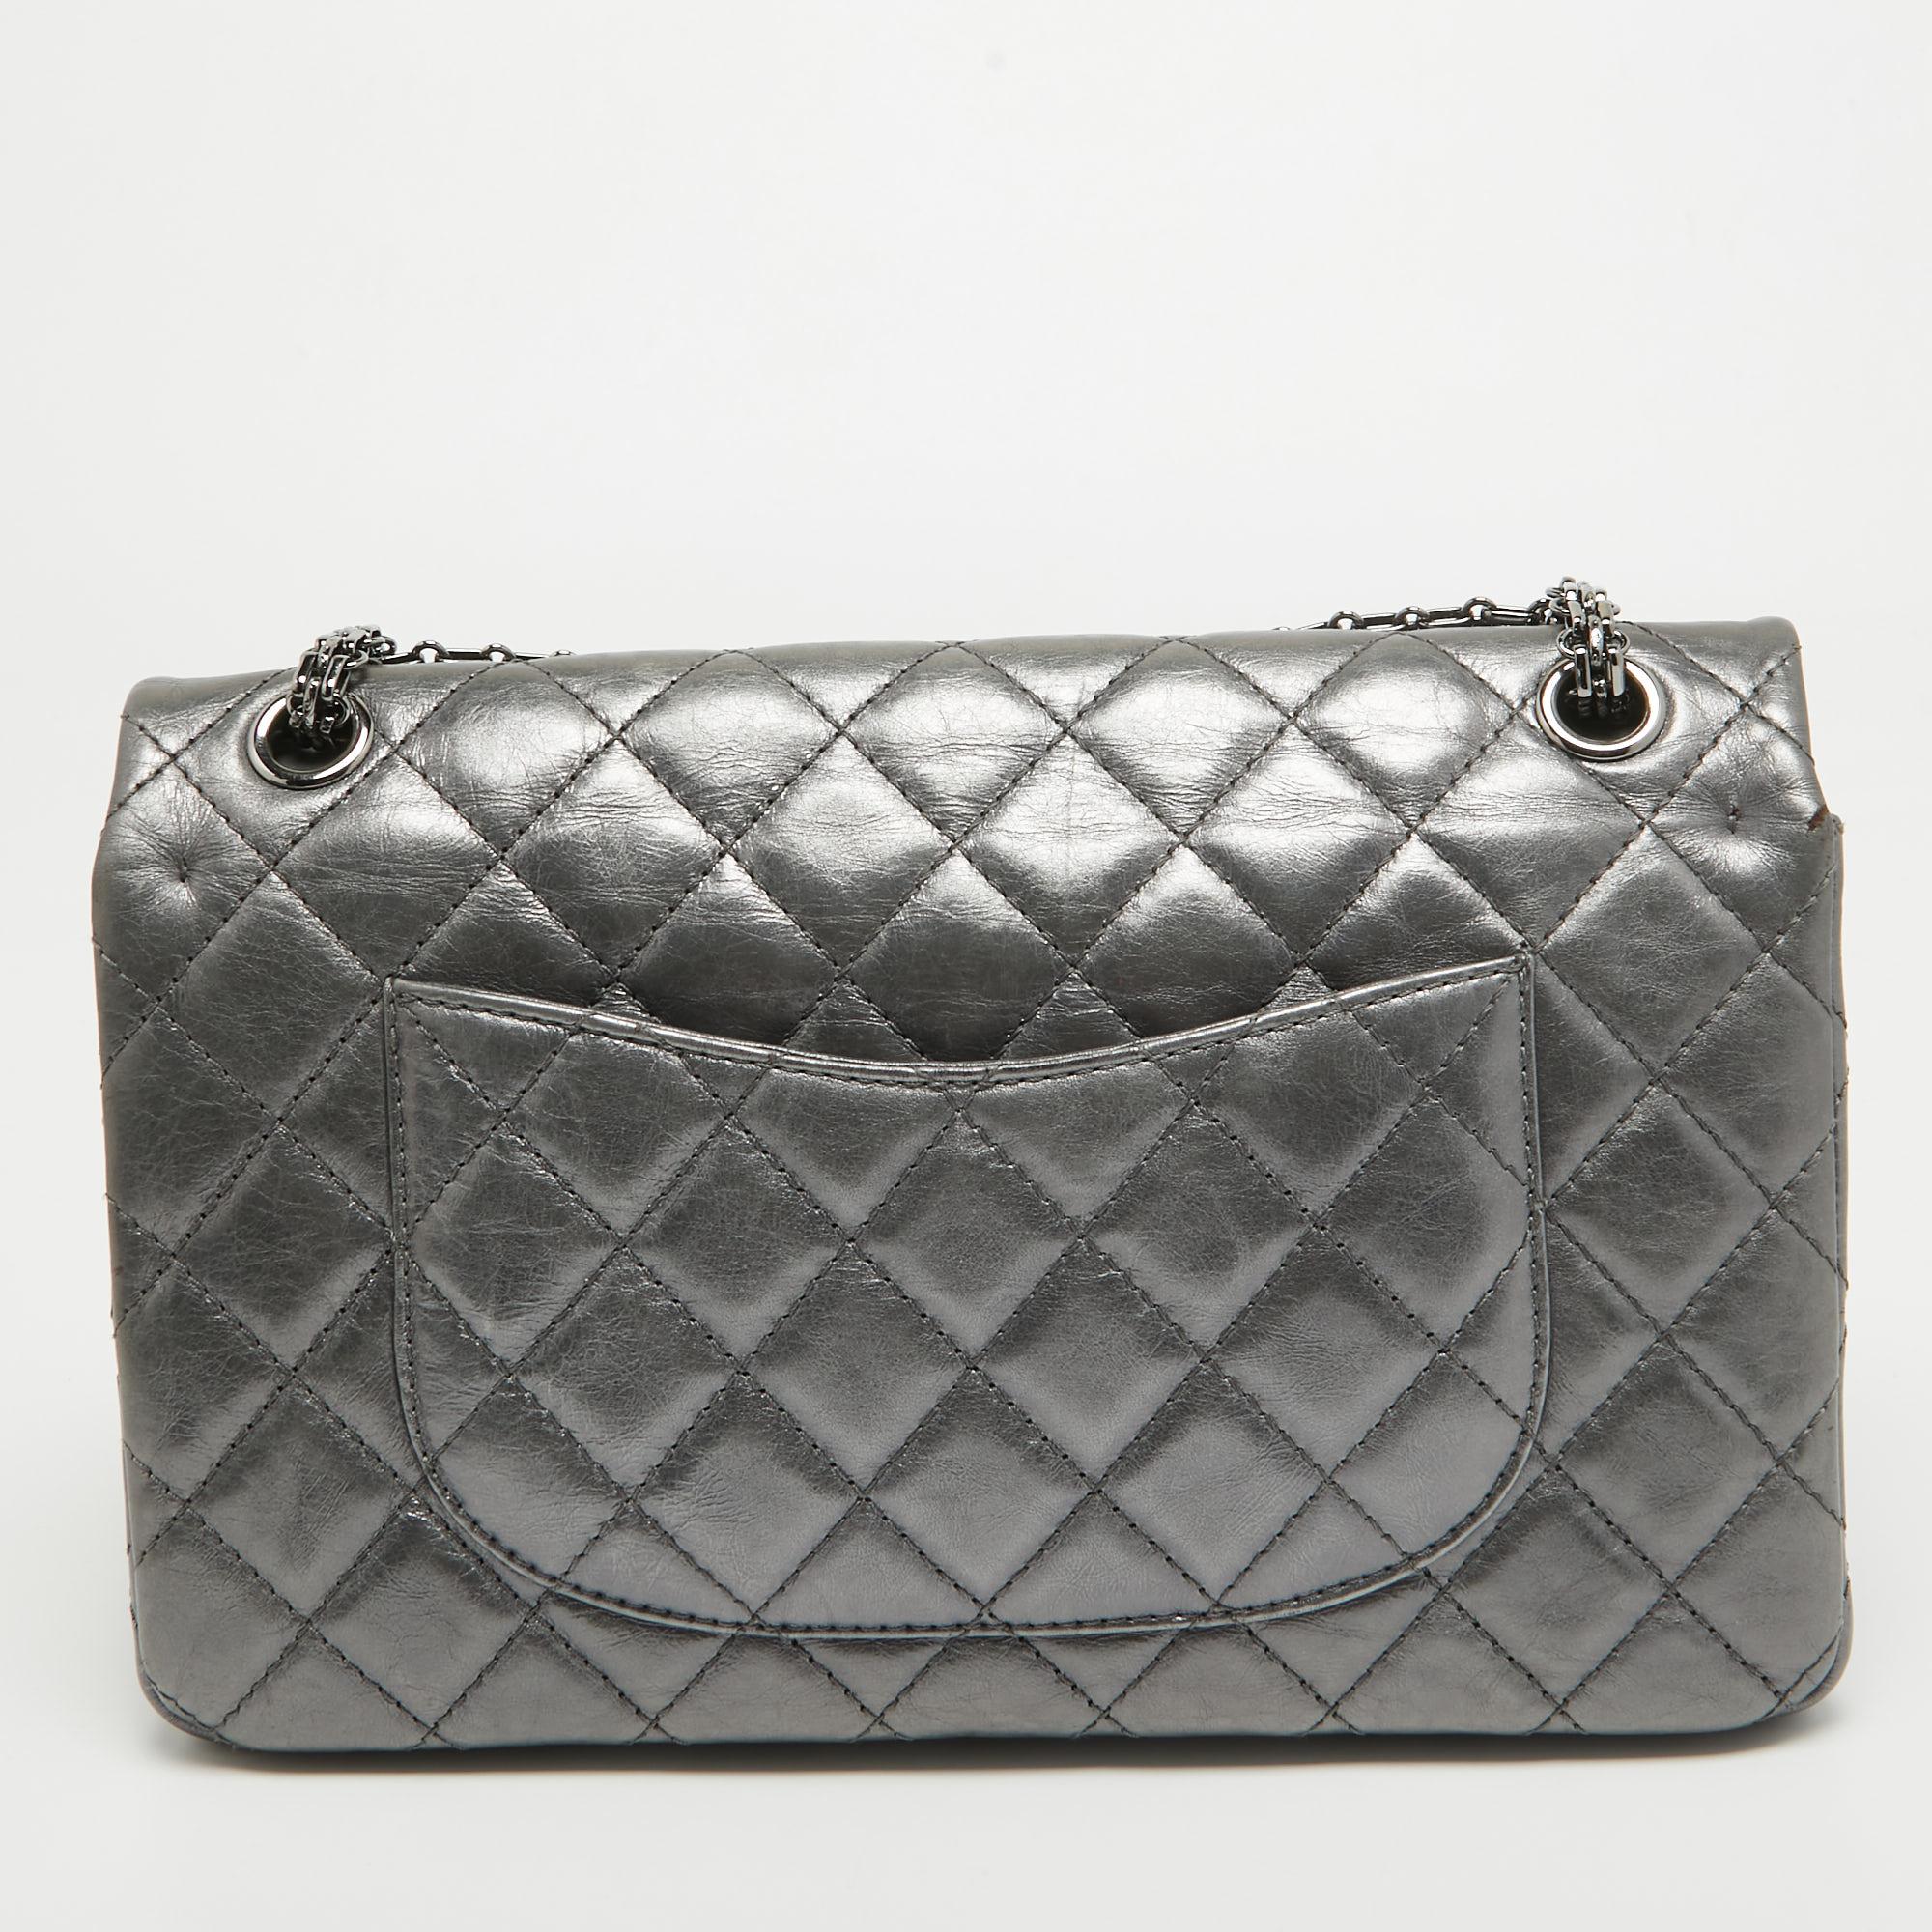 The house of Chanel offers this beautiful 226 Reissue 2.55 Flap bag to help you create timeless style edits every season. Crafted using quilted leather, this piece will last you a long time.

